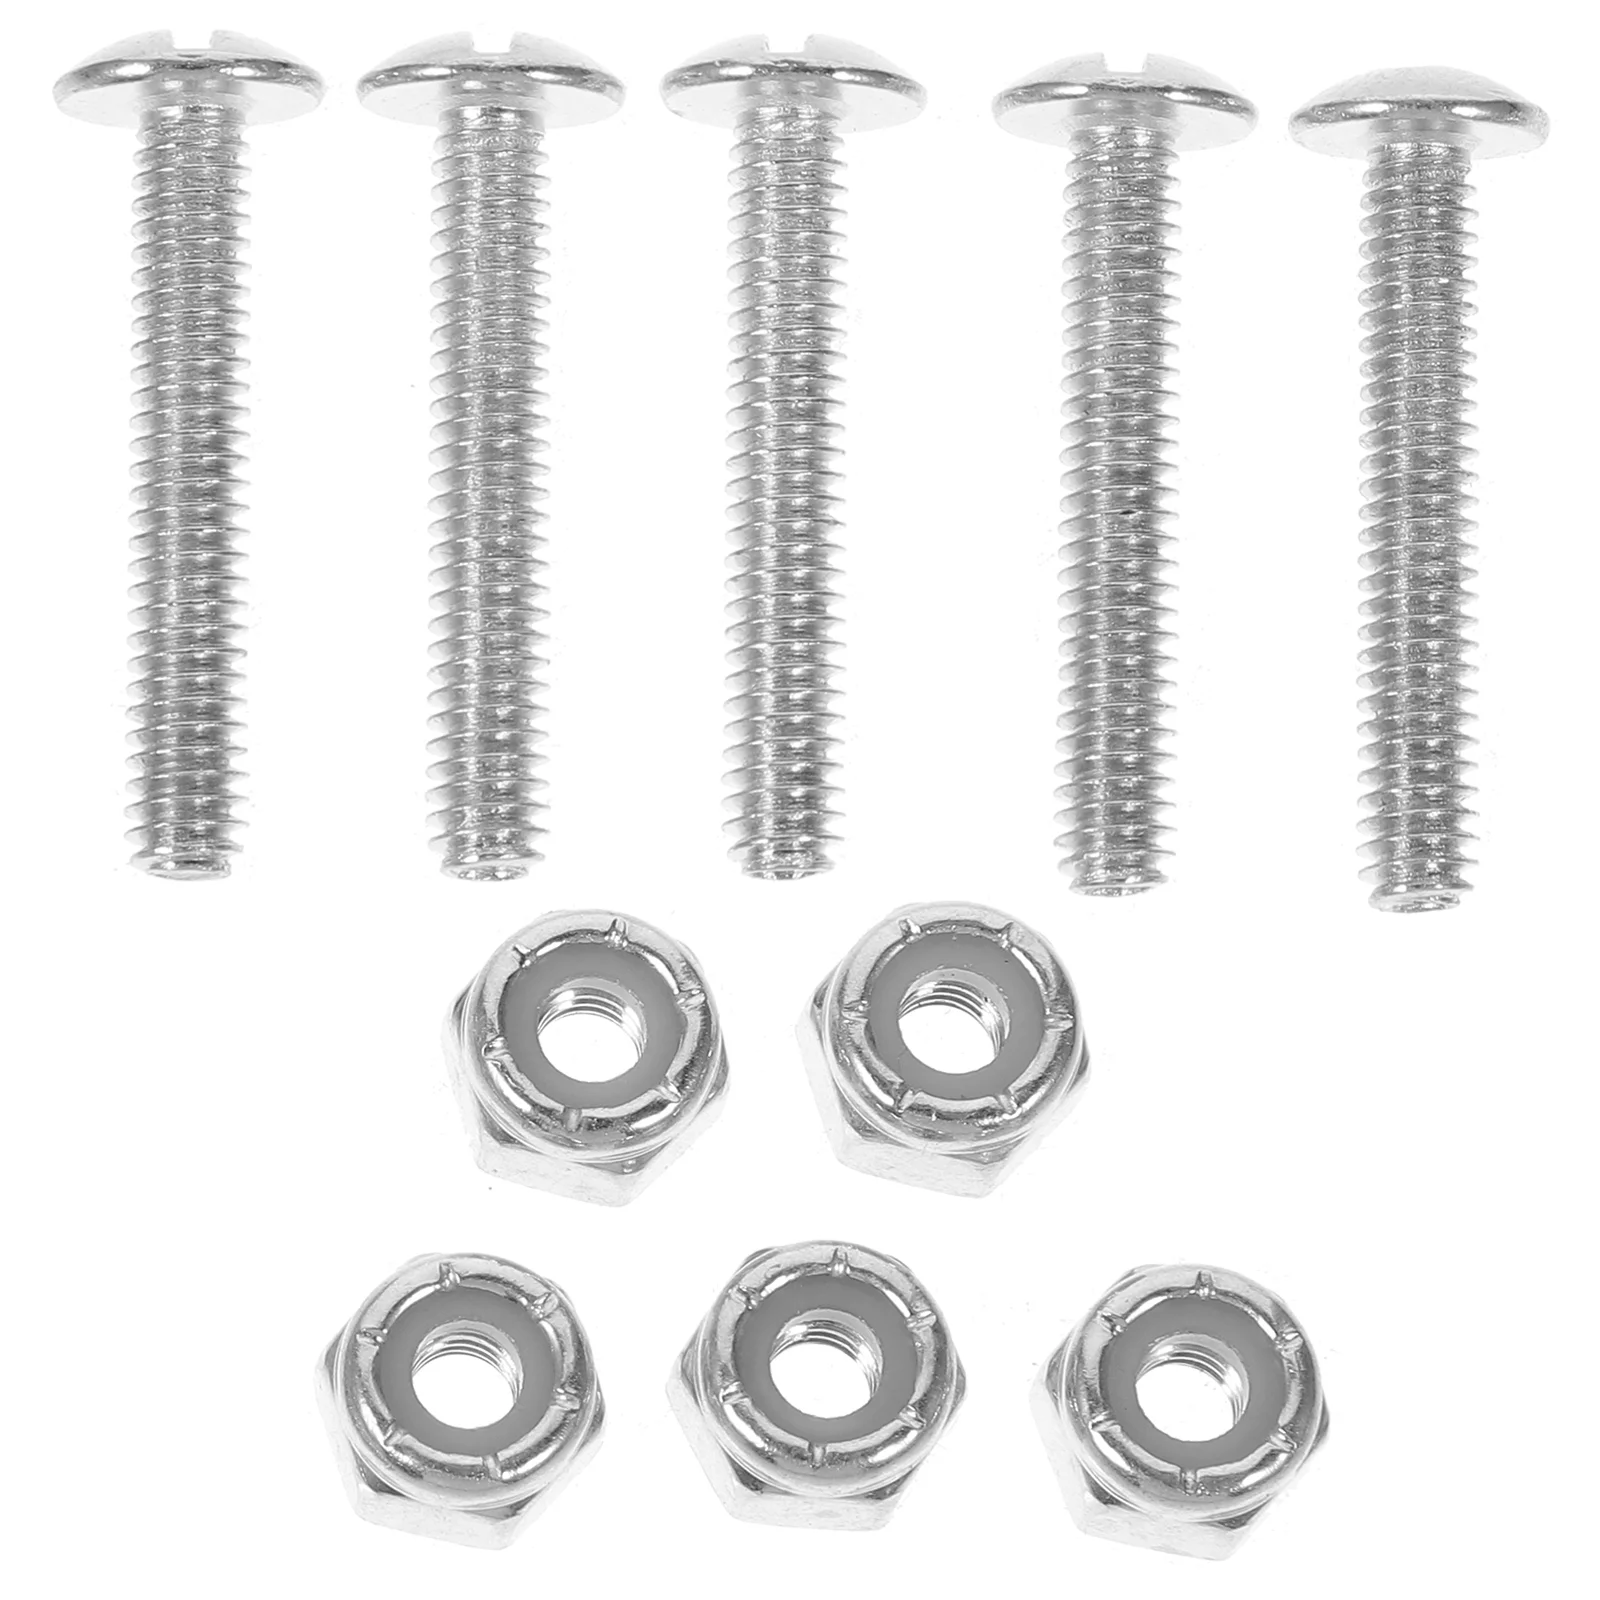 1 set v0 2 r1 complete hardware 3d printer fasteners screws nuts diy project full kits for voron 0 1 0 2 3d printer screws kit 12 Pcs Table Football Screws Foosball Replacement Parts Nut Soccer Hardware Machine Nuts Galvanized Iron Accessories